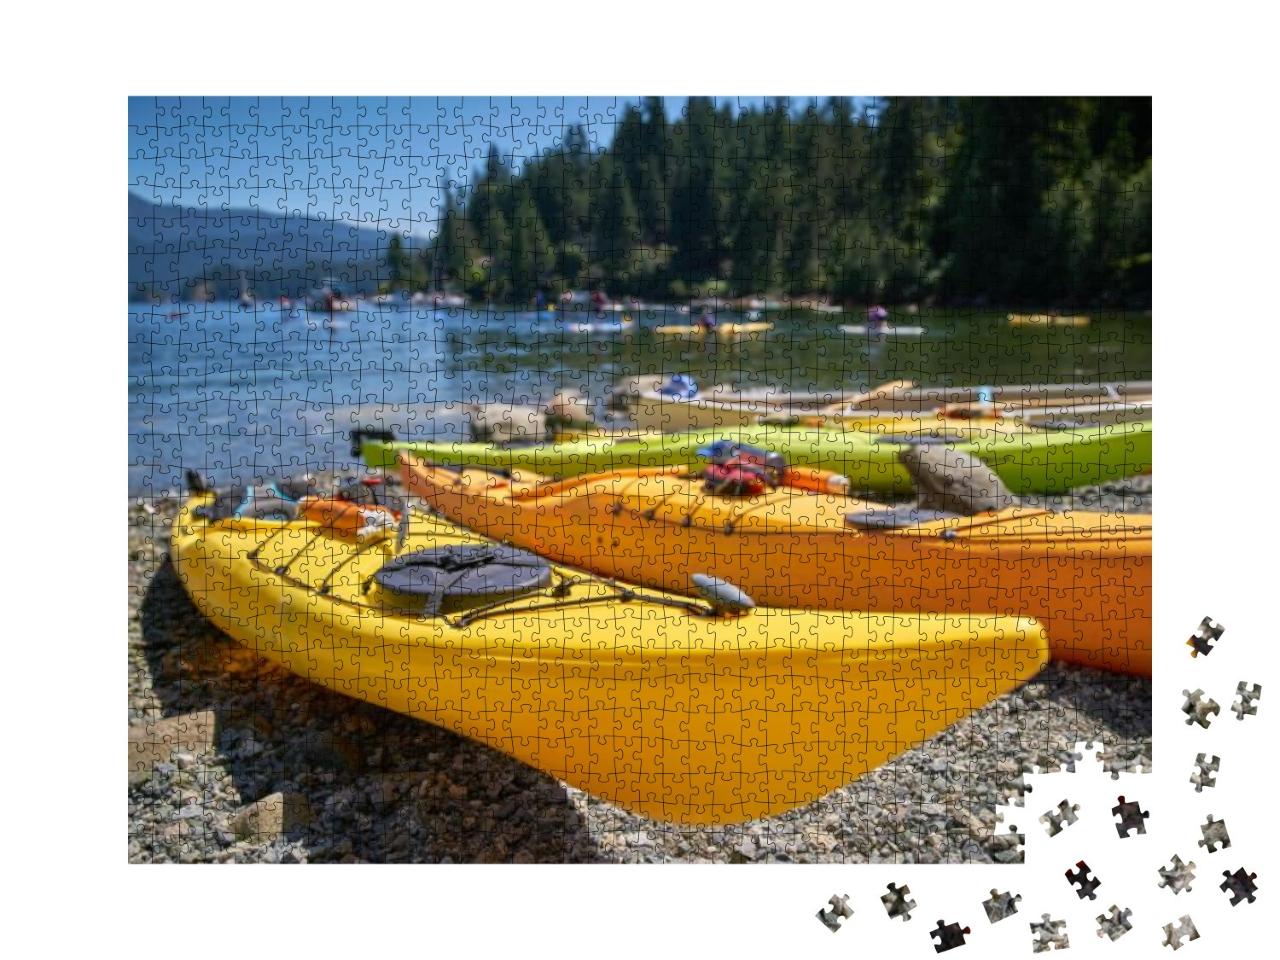 Kayaks on the Beach Deep Cove Bc. Kayaks on the Beach of... Jigsaw Puzzle with 1000 pieces